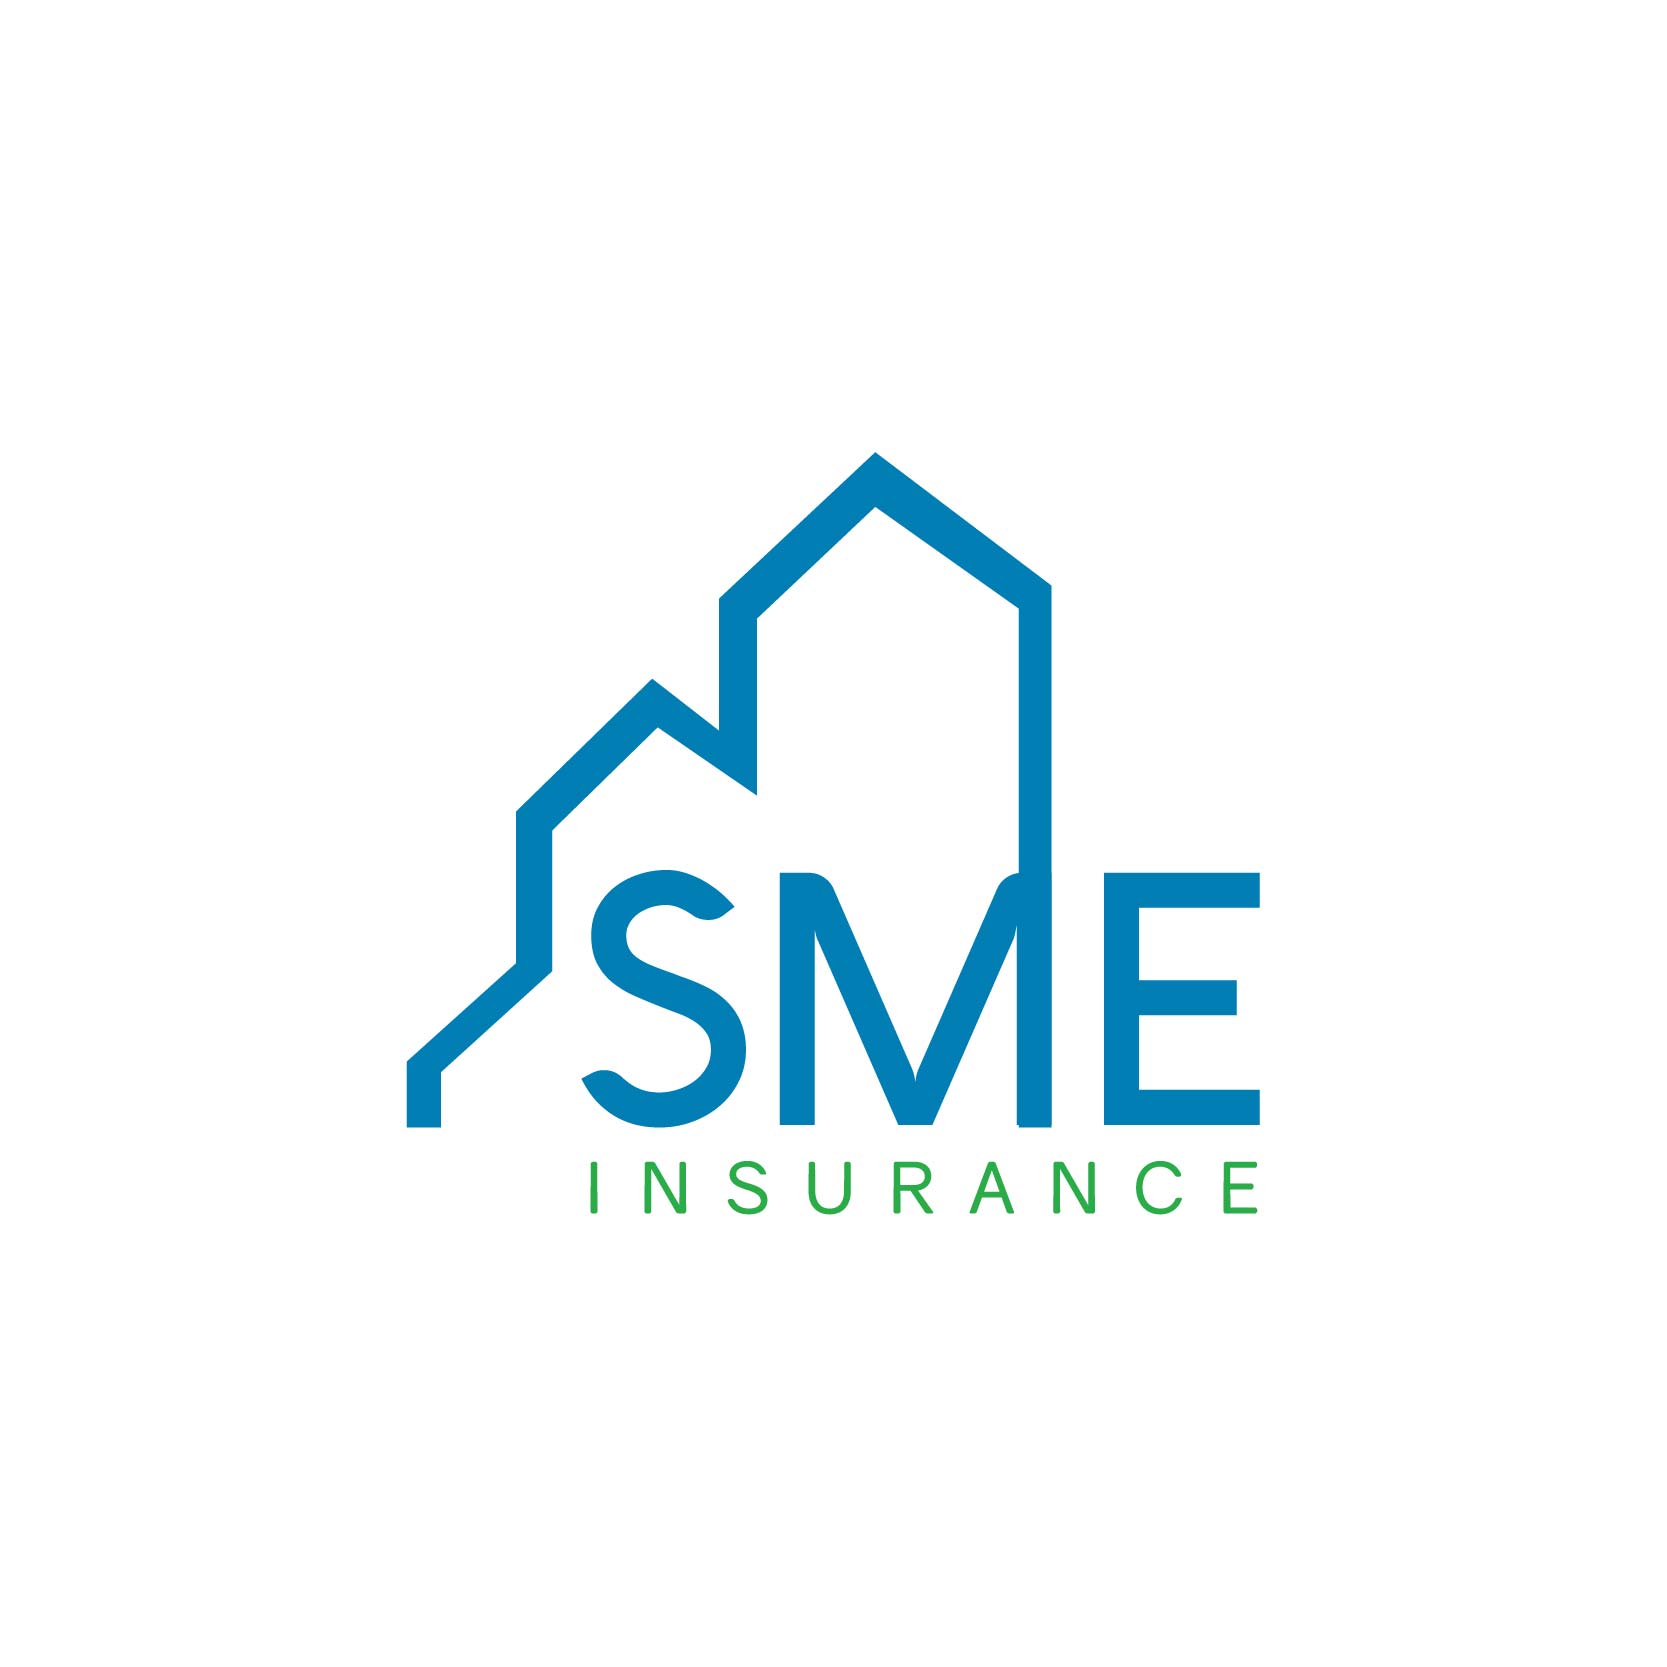 the time for Kenyan small and medium enterprises (SMEs) to embrace insurance coverage is long overdue.